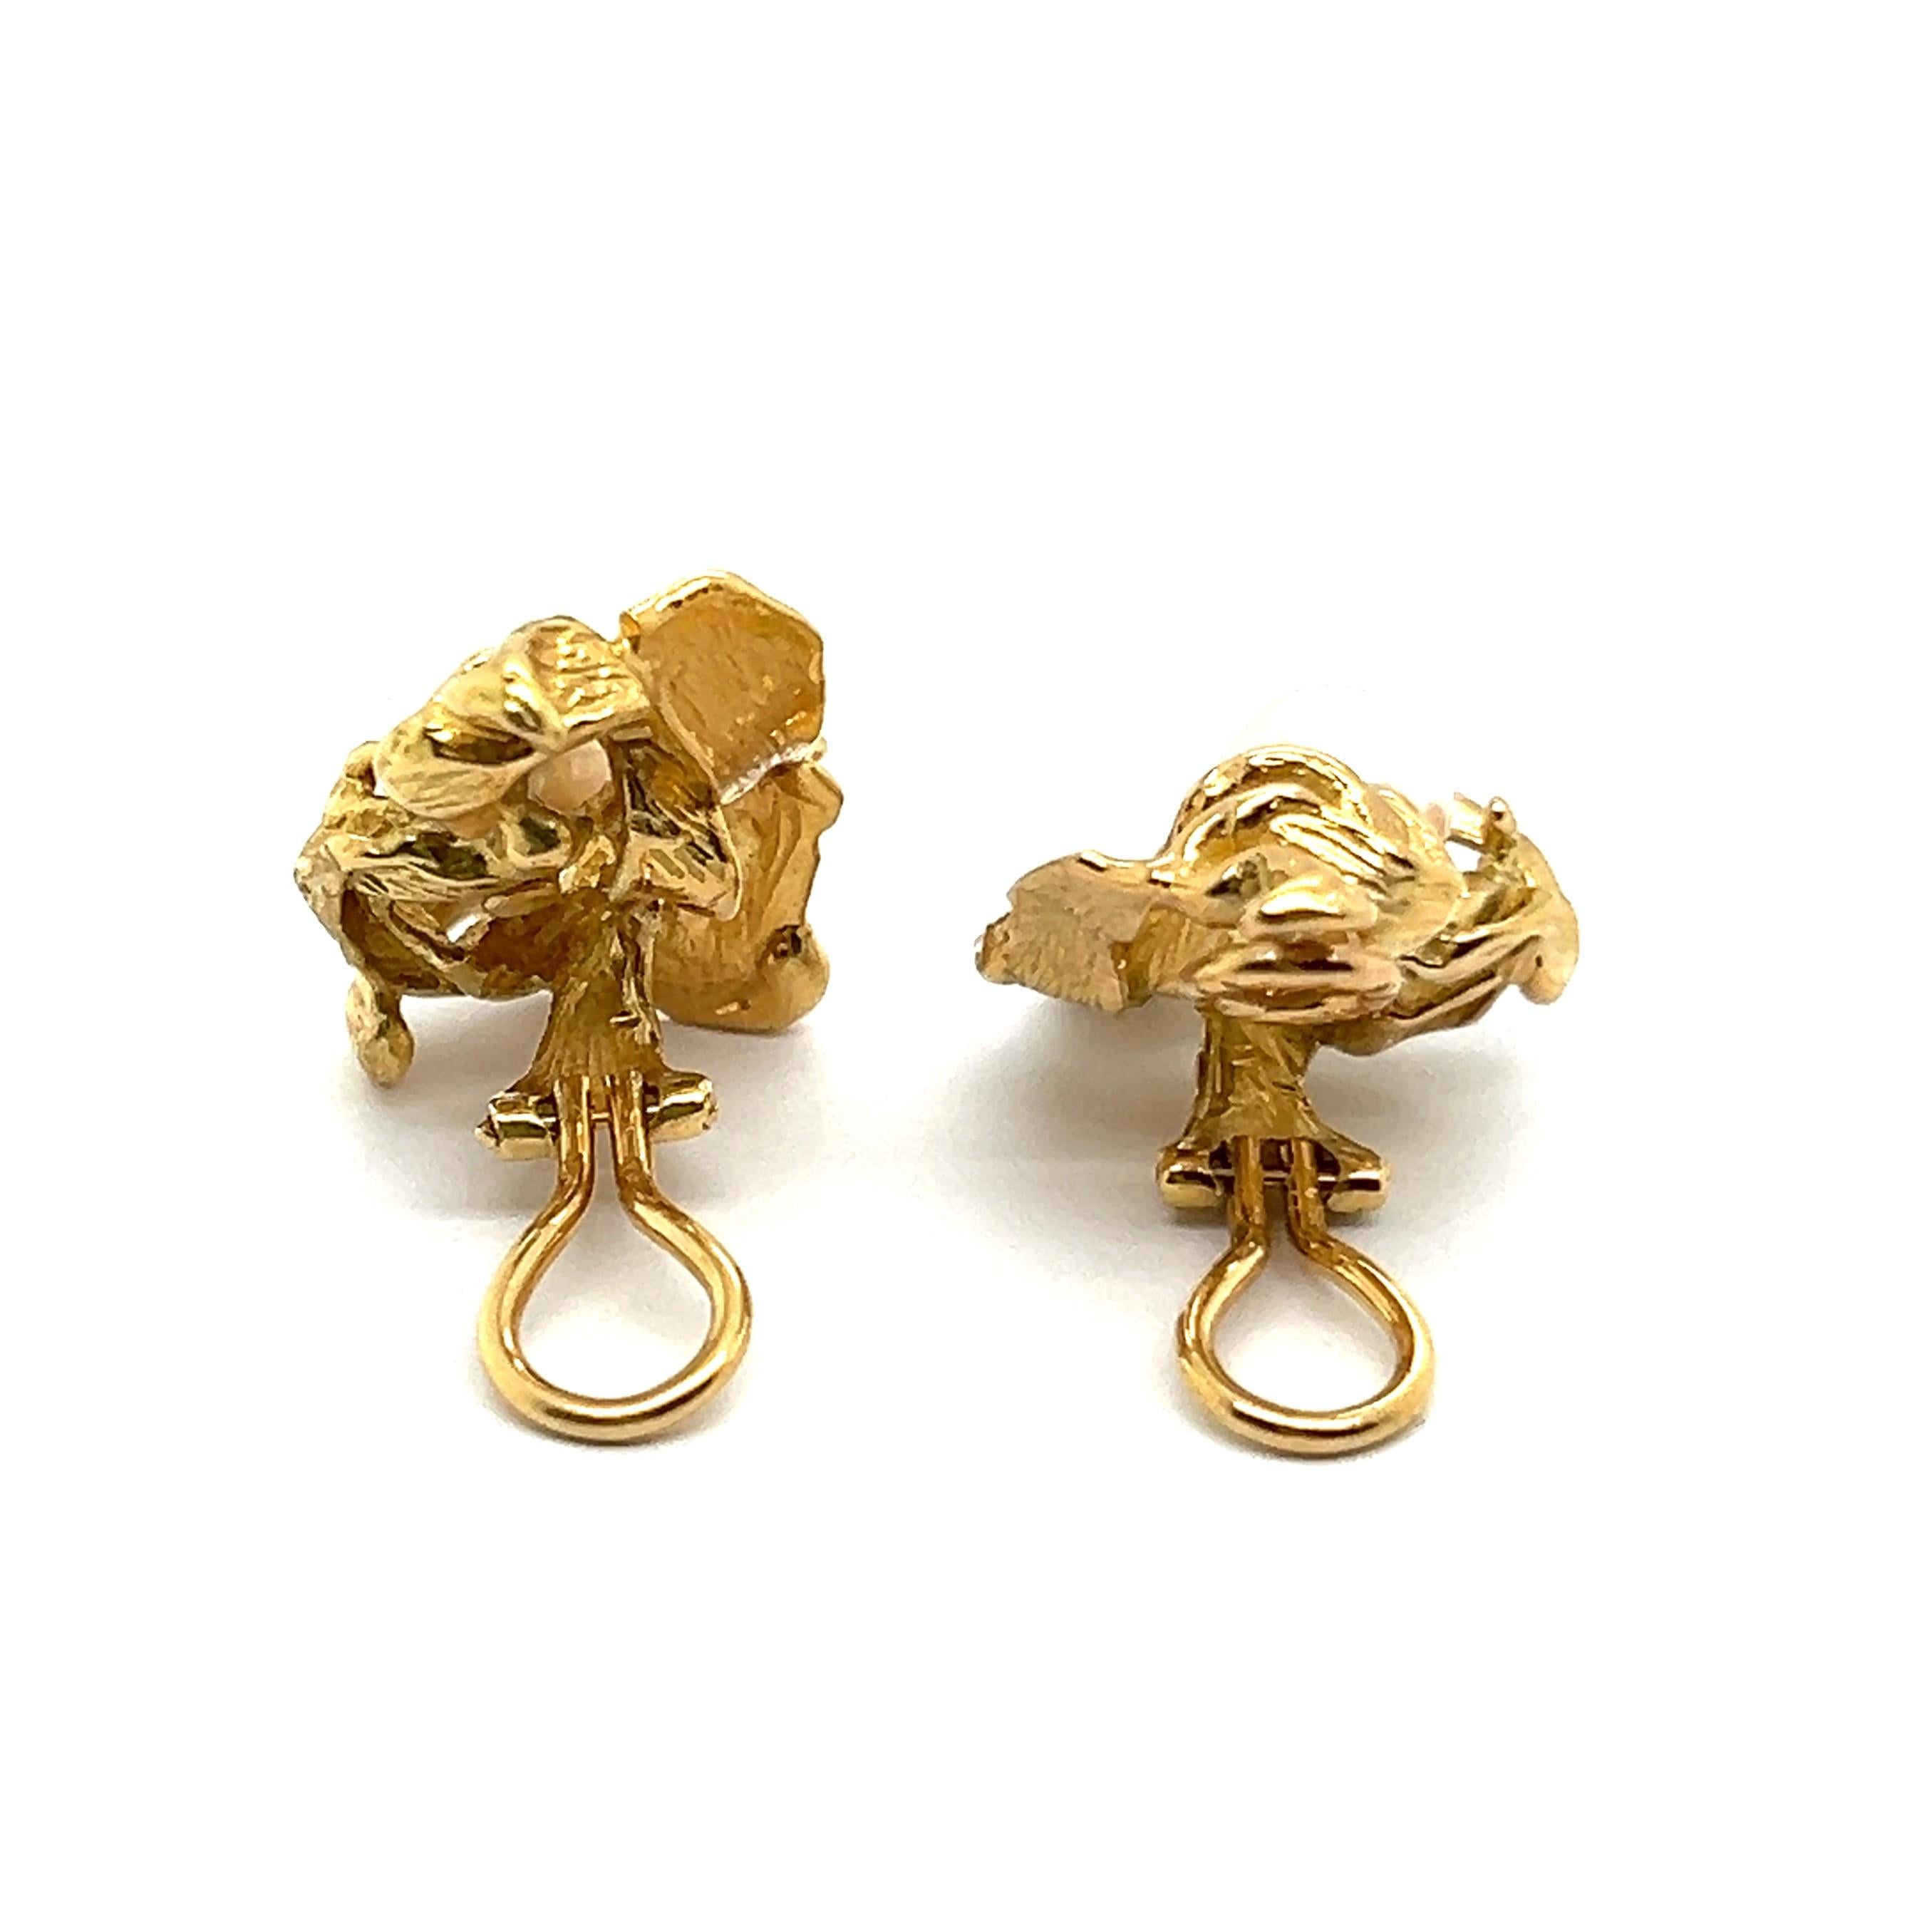 Sculptural Earrings with Akoya Pearls in 18 Karat Yellow Gold by Gilbert Albert For Sale 1